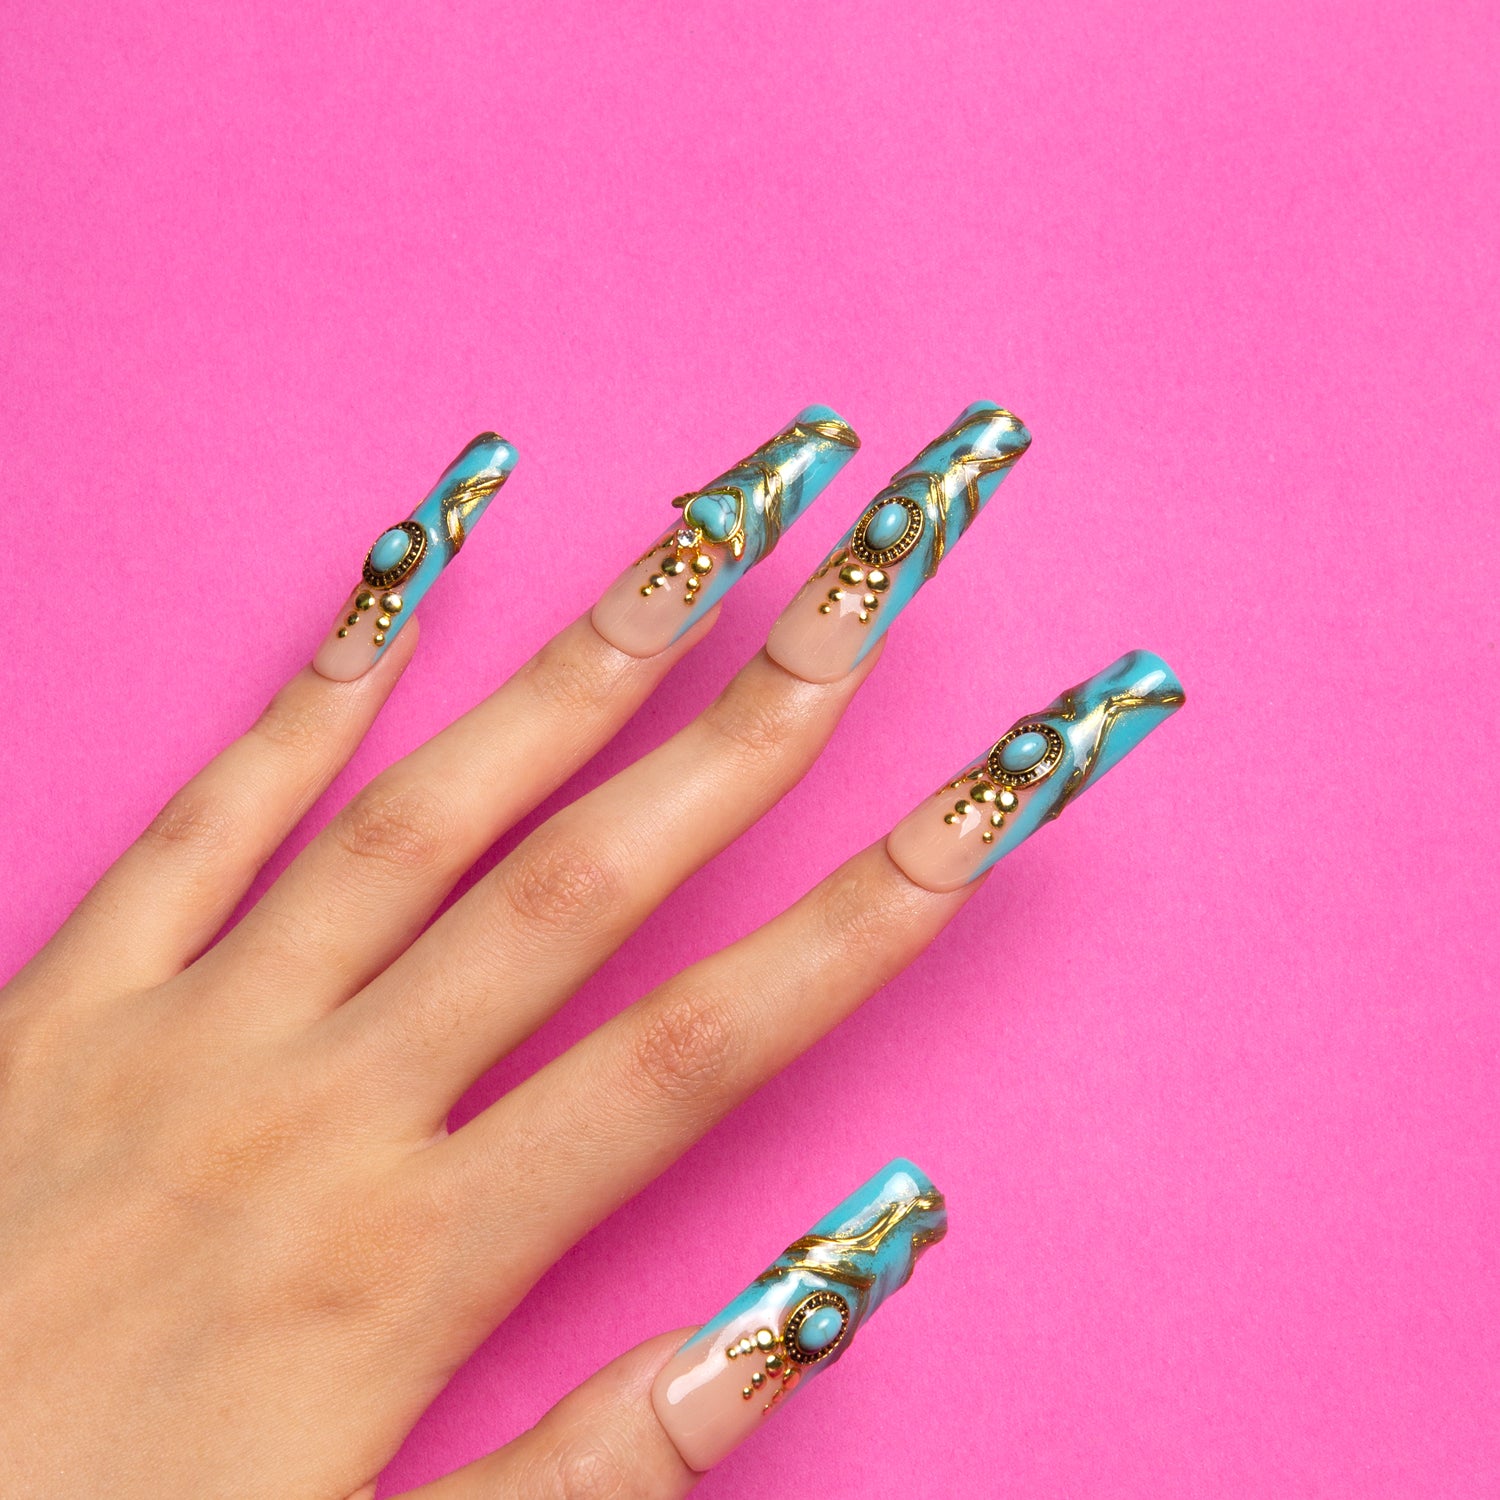 Hand showcasing Lovful's H122 press-on nails in turquoise, embellished with luxurious golden decor and sparkling gems, on a pink background.